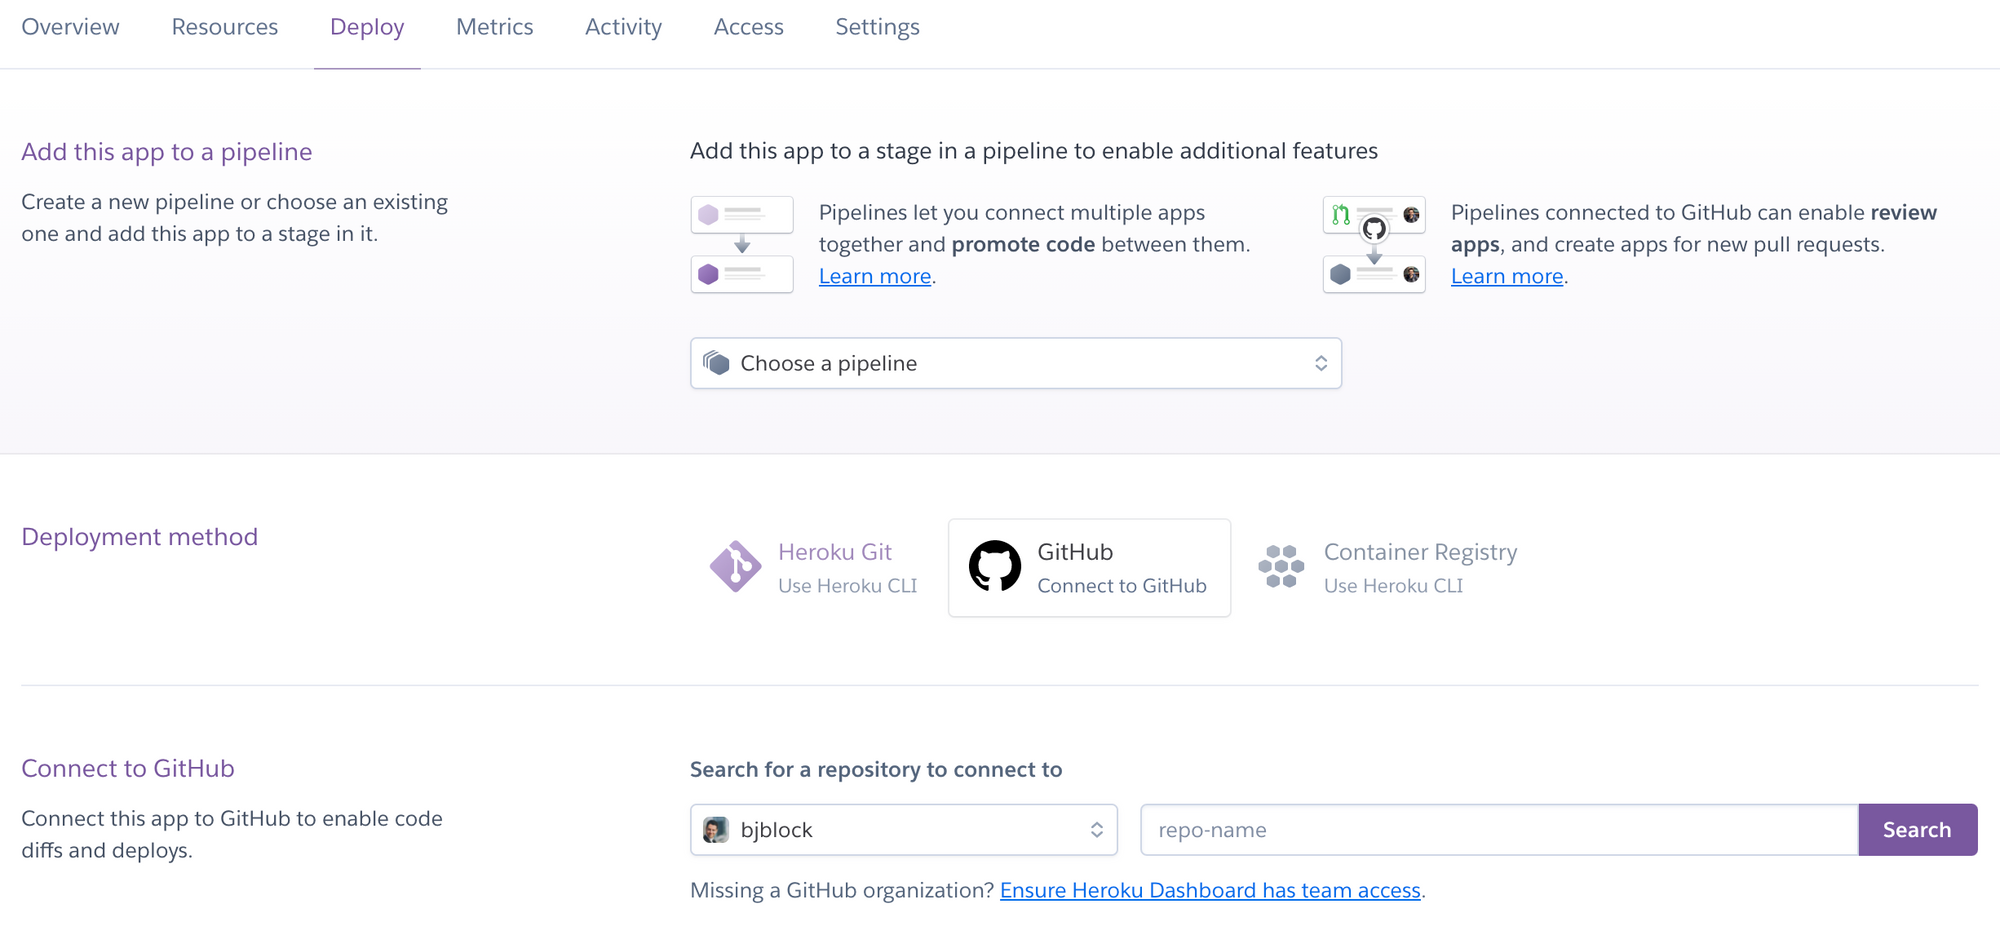 How to Make Changes to The Application Deployed on Heroku